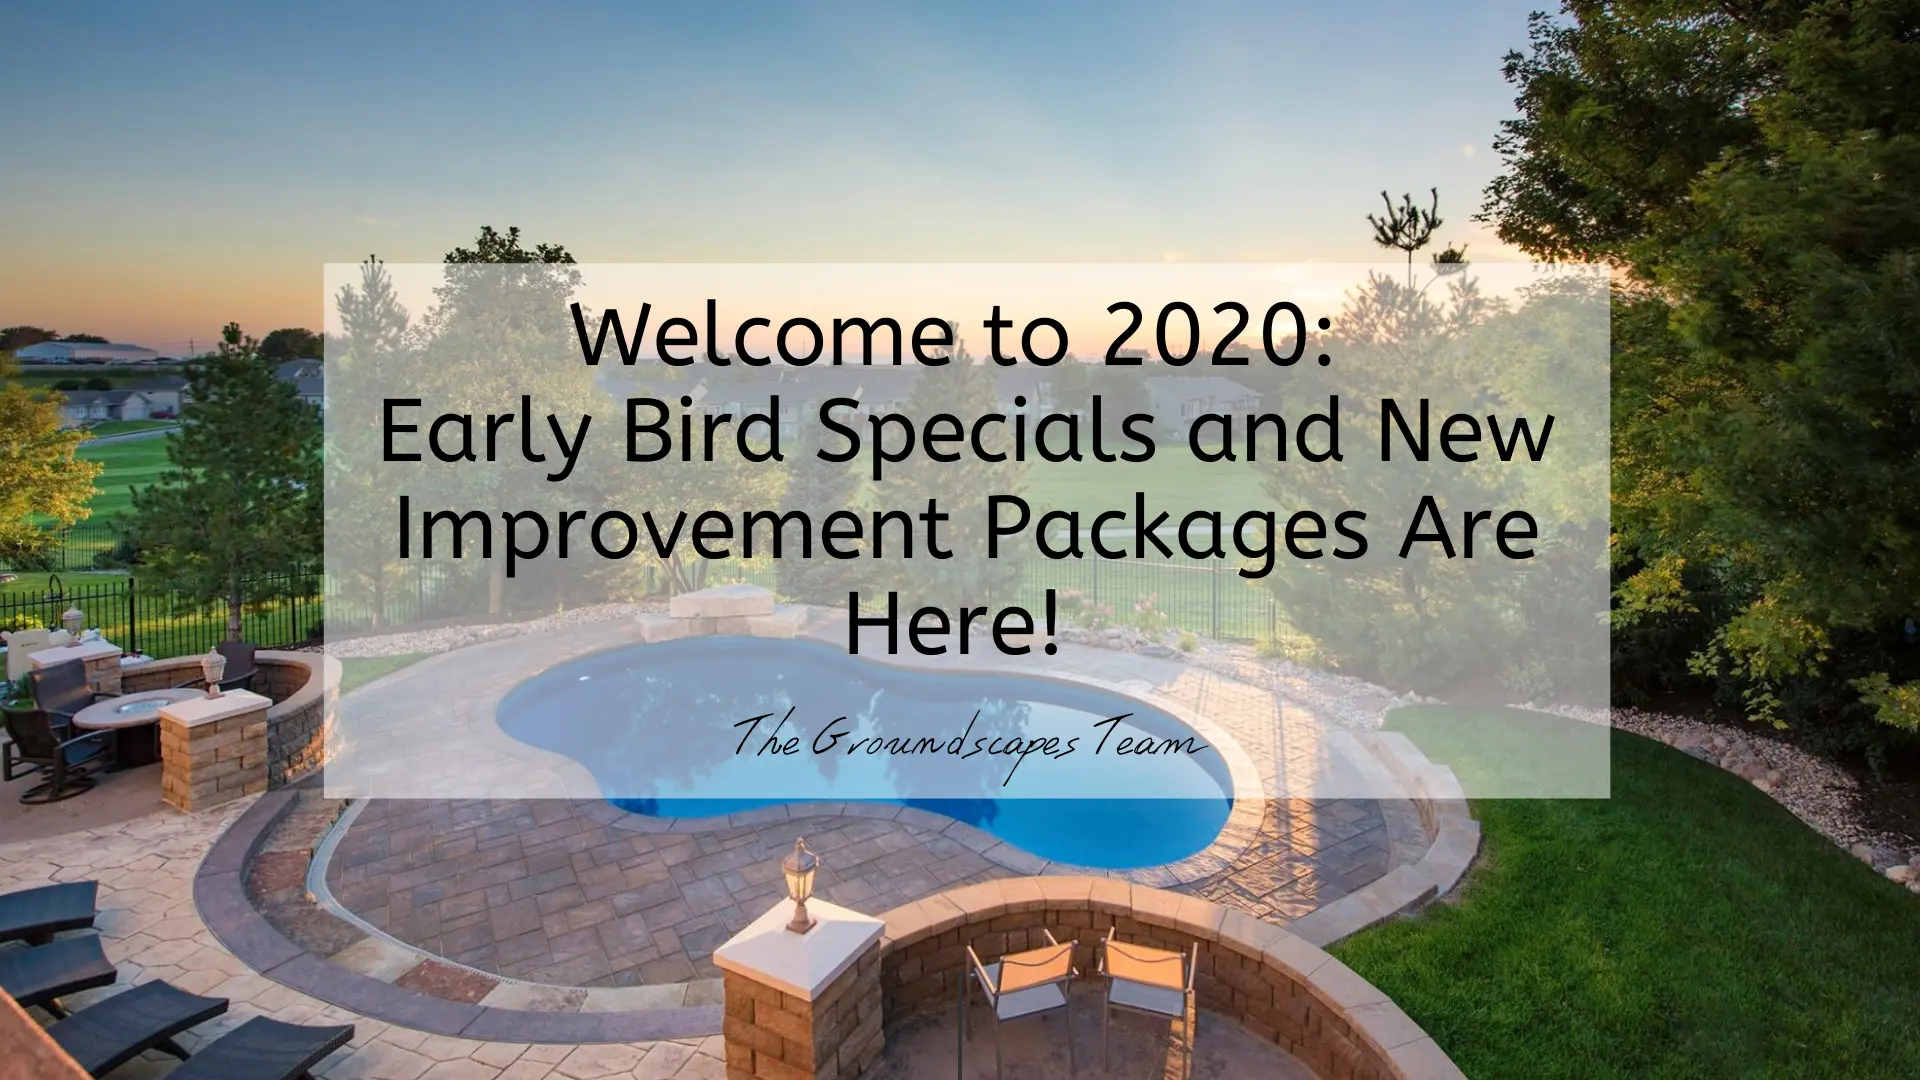 Welcome to 2020: Early Bird Specials and New Improvement Packages Are Here!